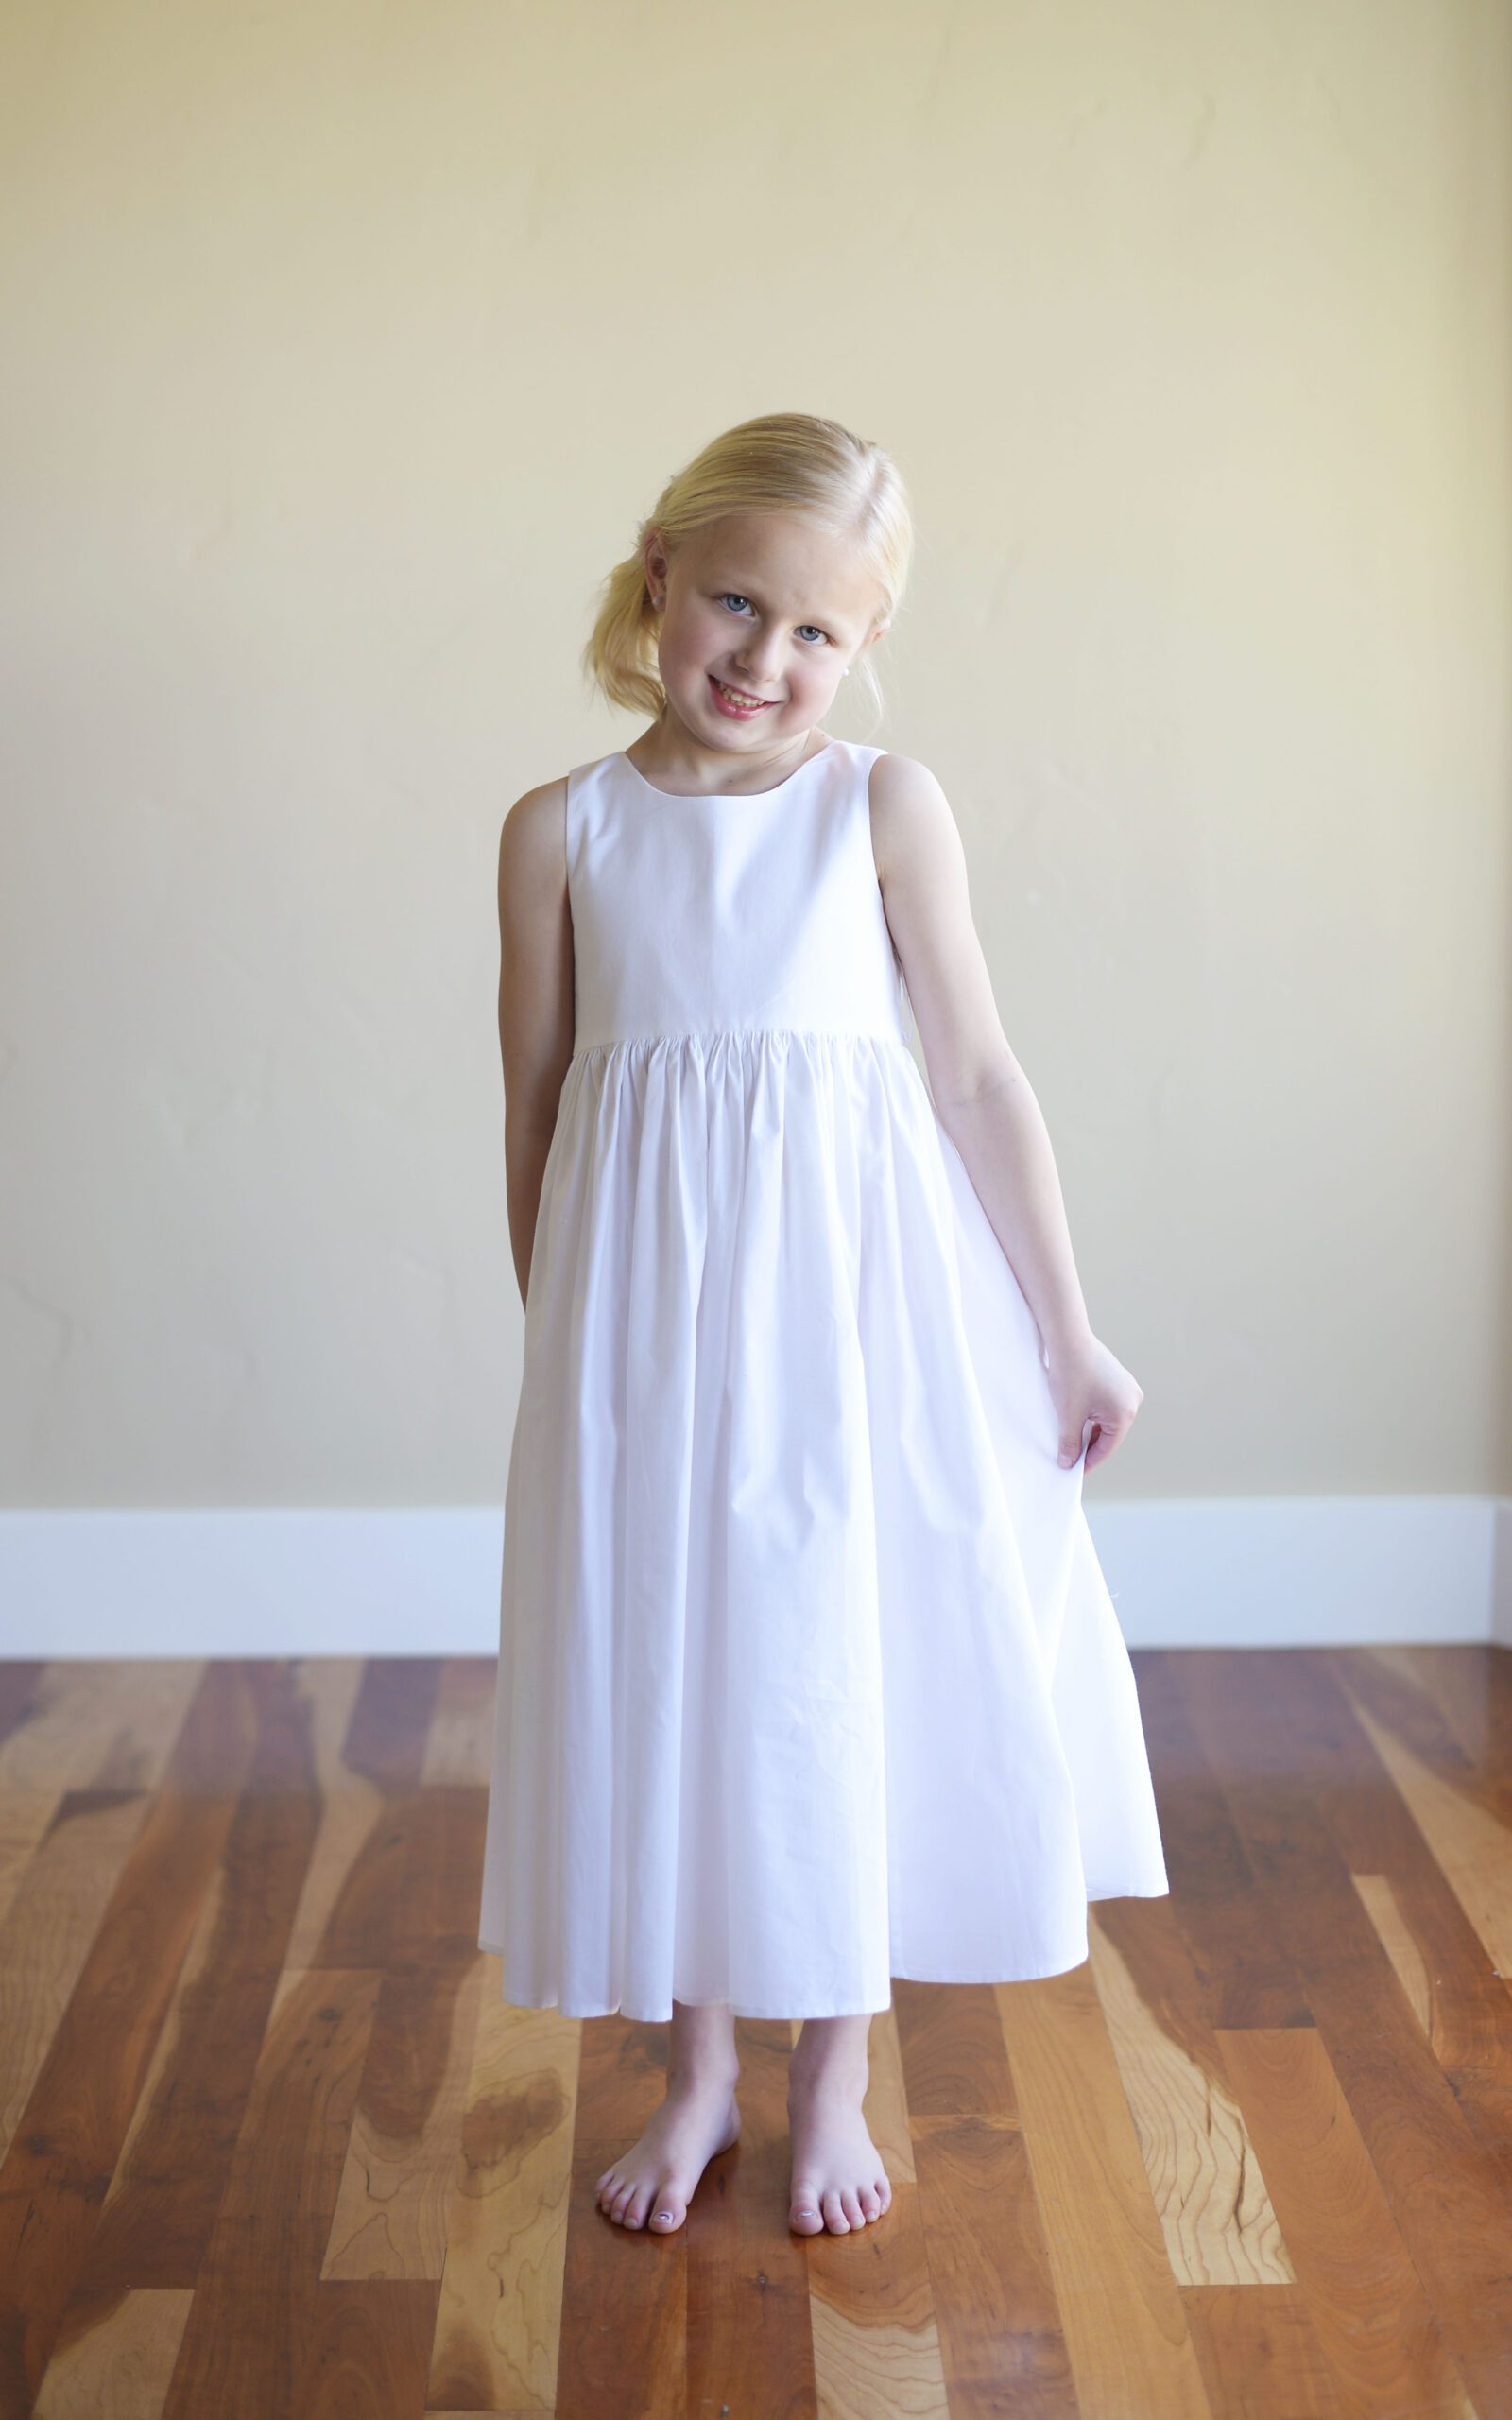 A photo of a flower girl wearing a simple cotton flower girl dress in white